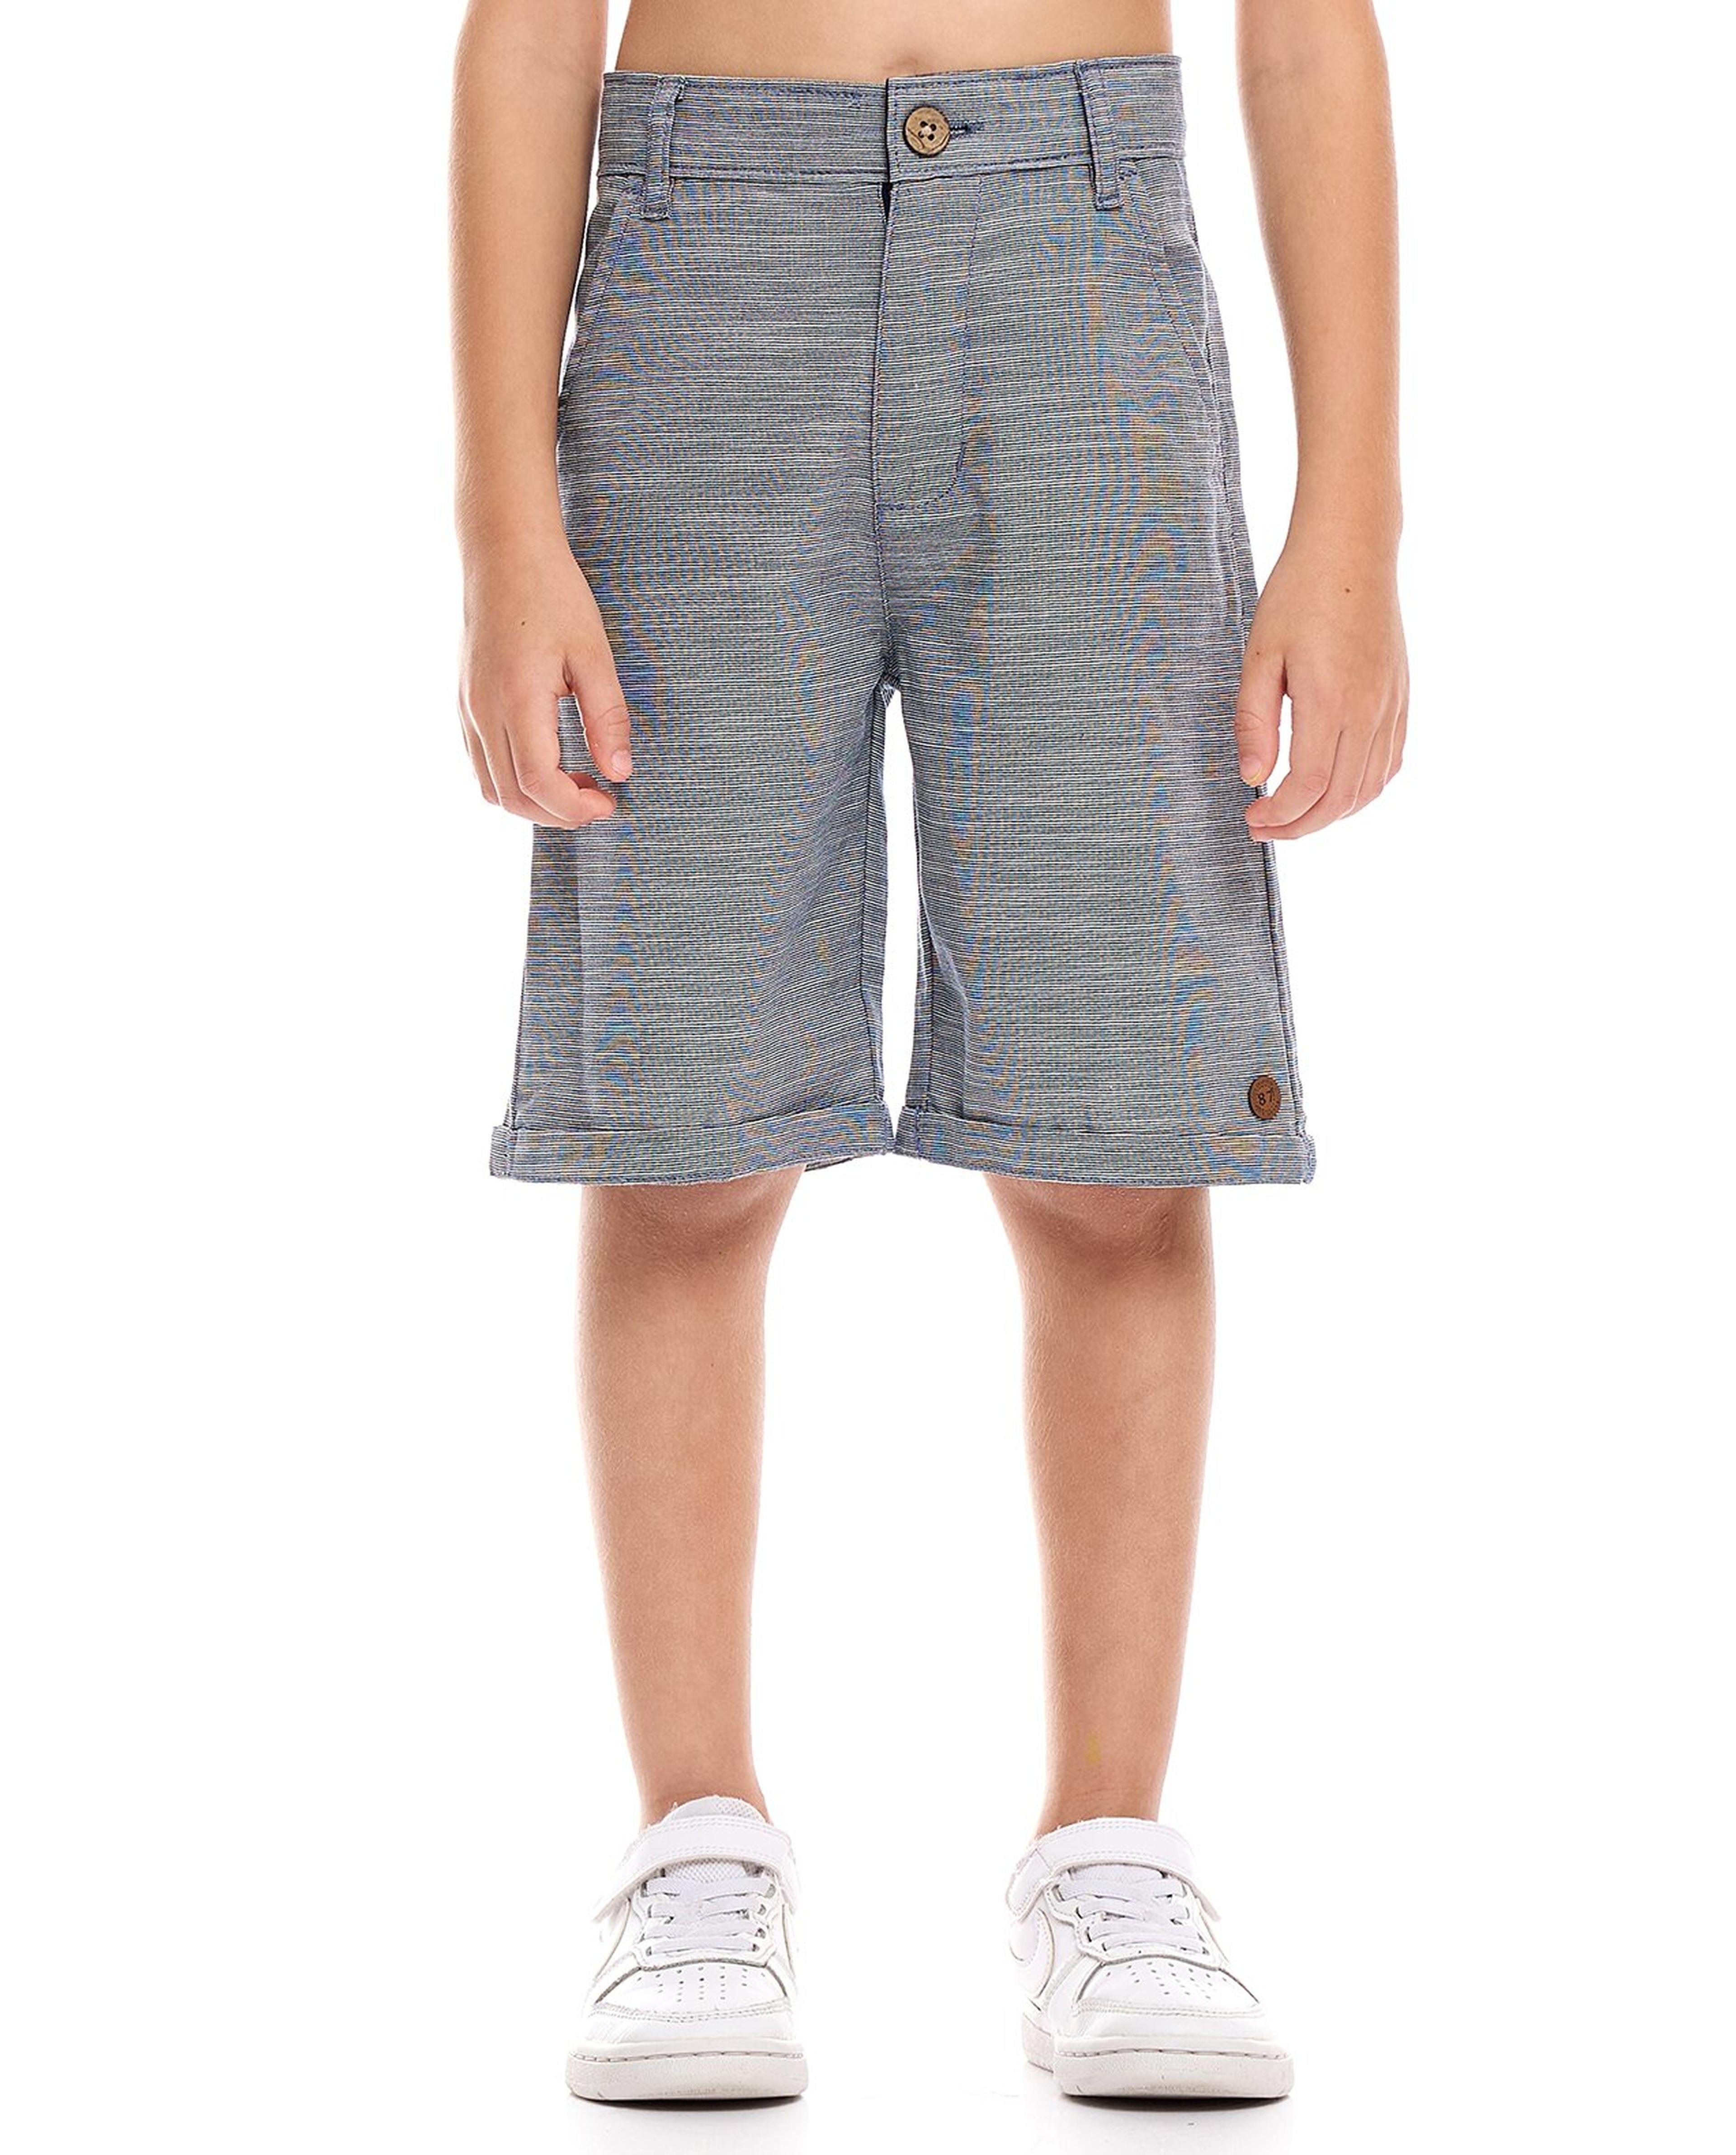 Woven Shorts with Button Closure